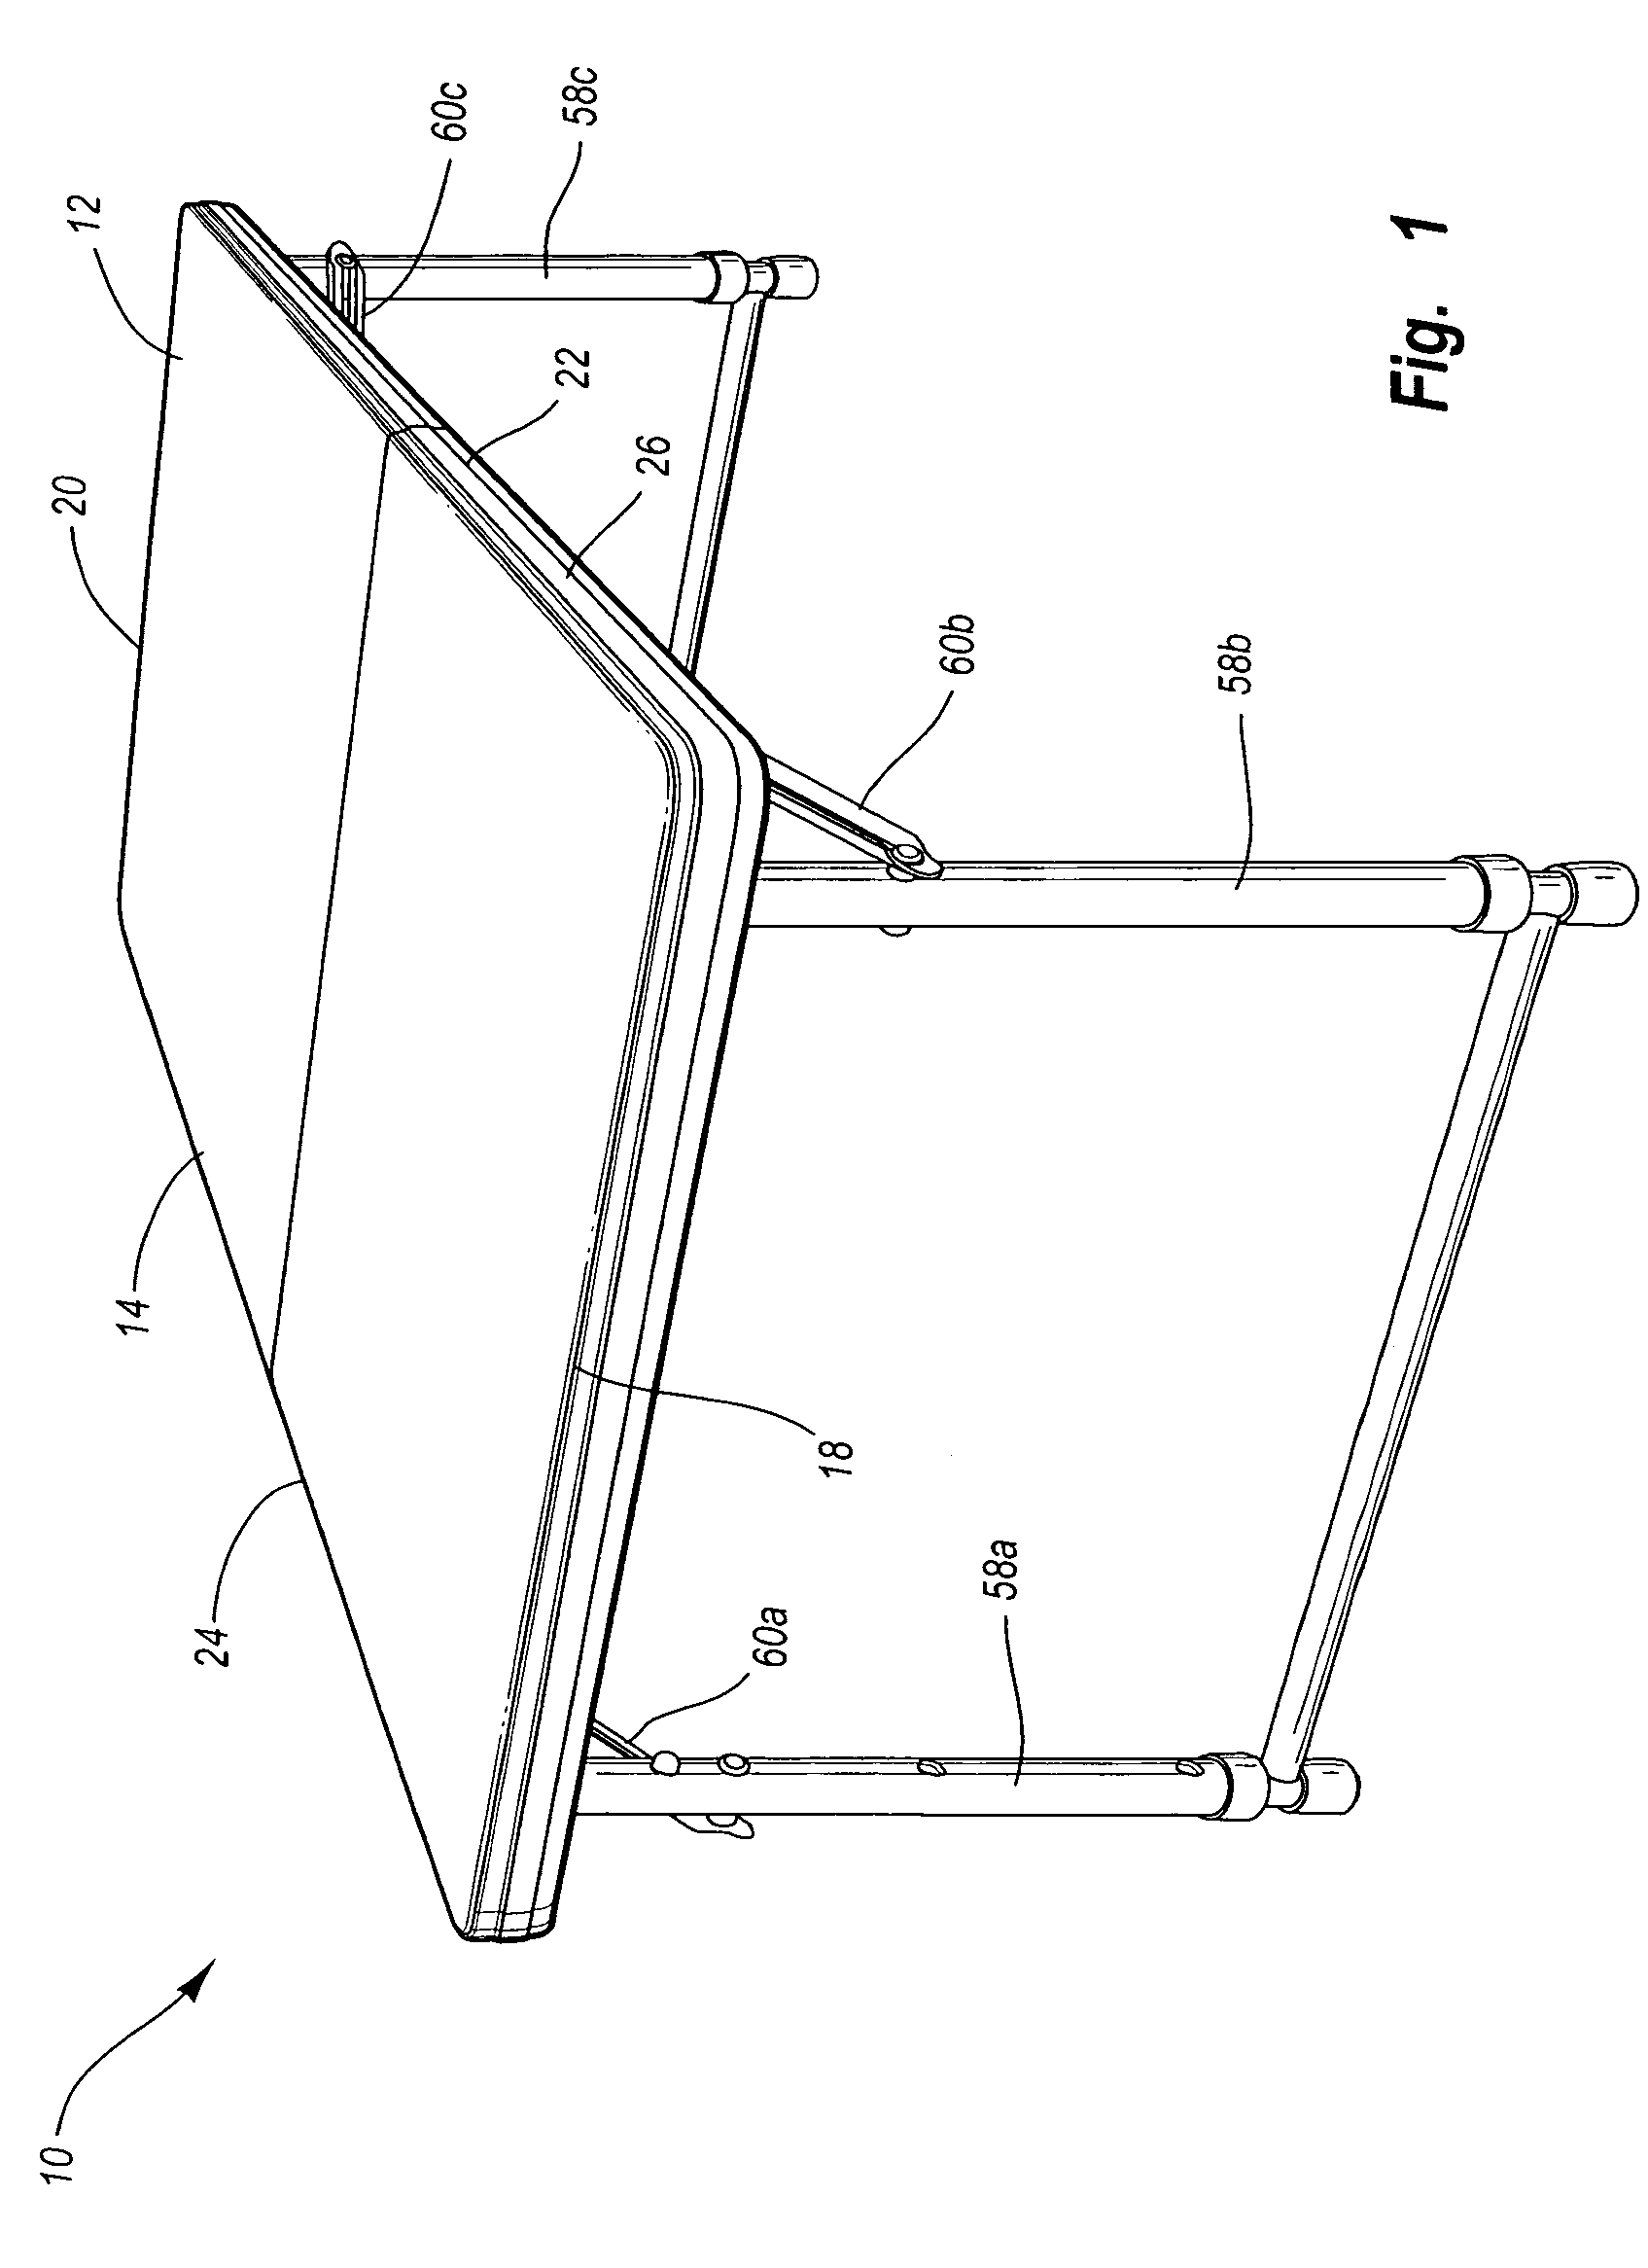 Locking mechanism for a fold-in-half table